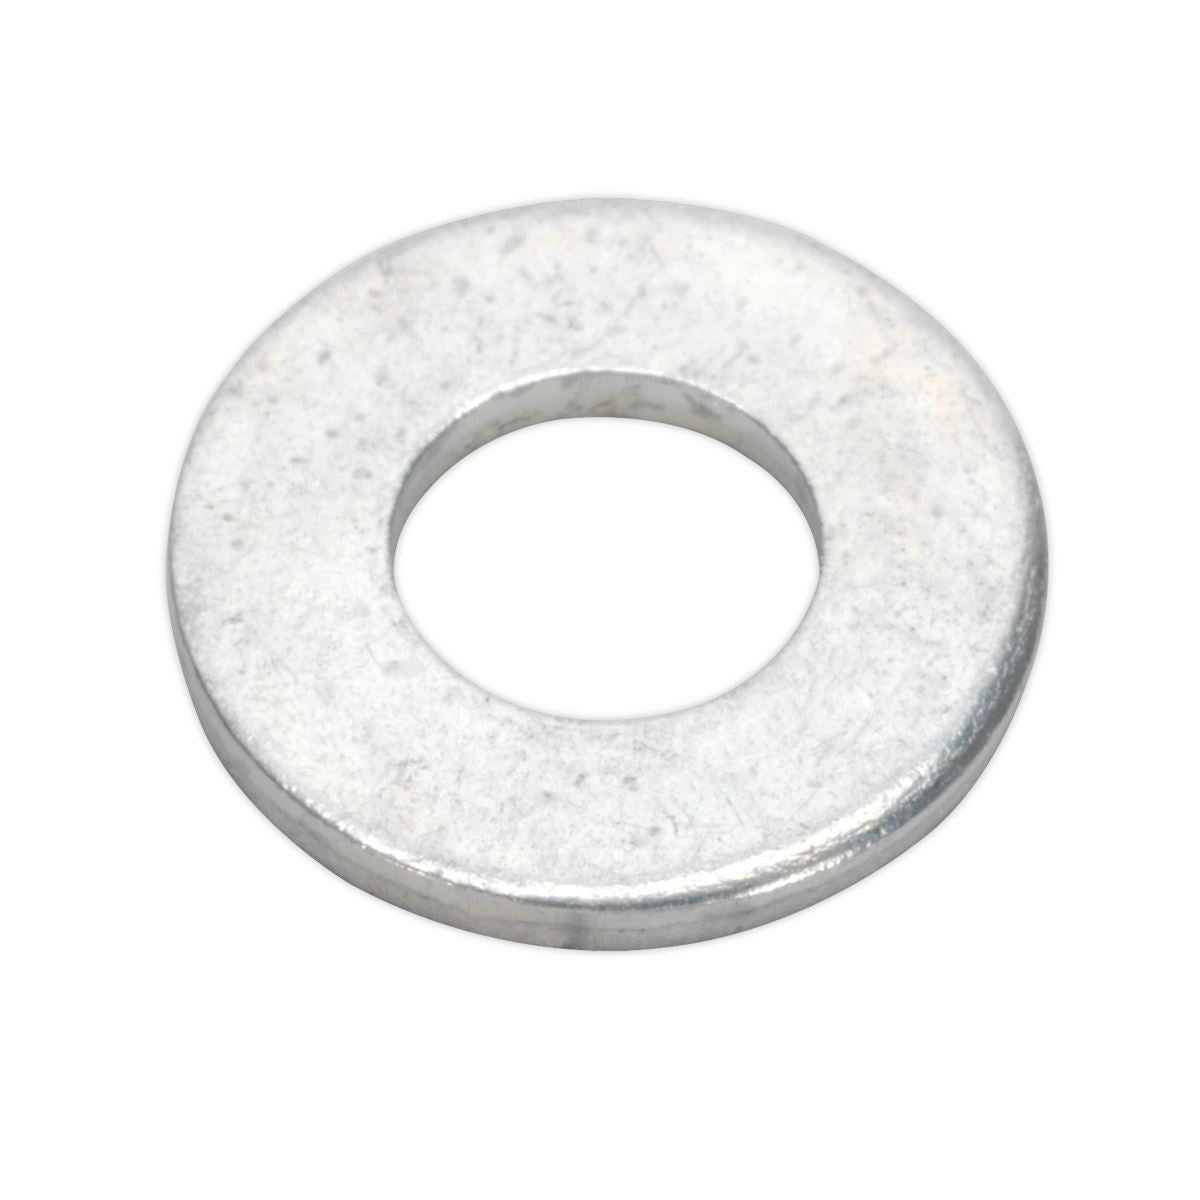 Sealey Flat Washer 3/8" x 3/4" Table 3 Imperial Zinc Pack of 100